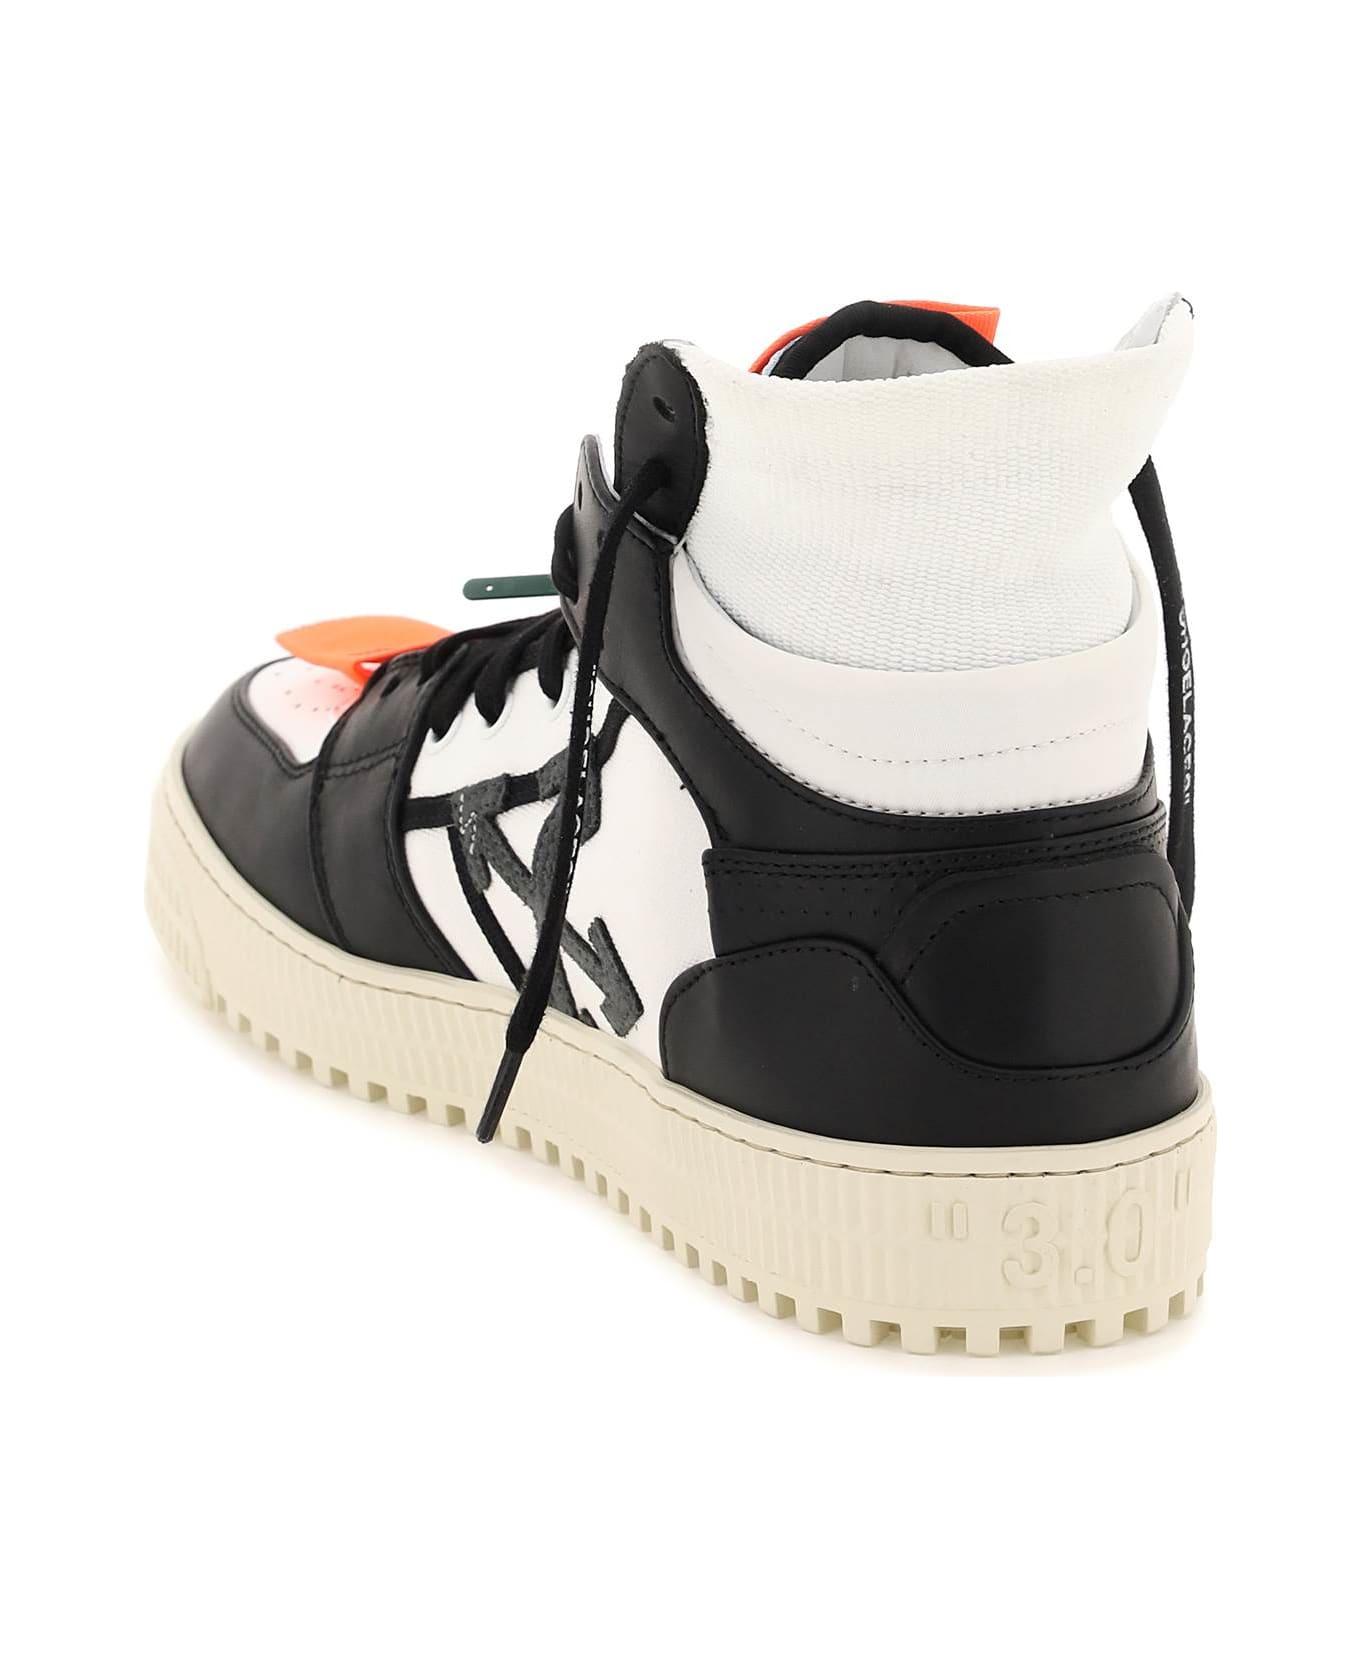 Off-White 'off-court 3.0' High-top Sneakers - Black